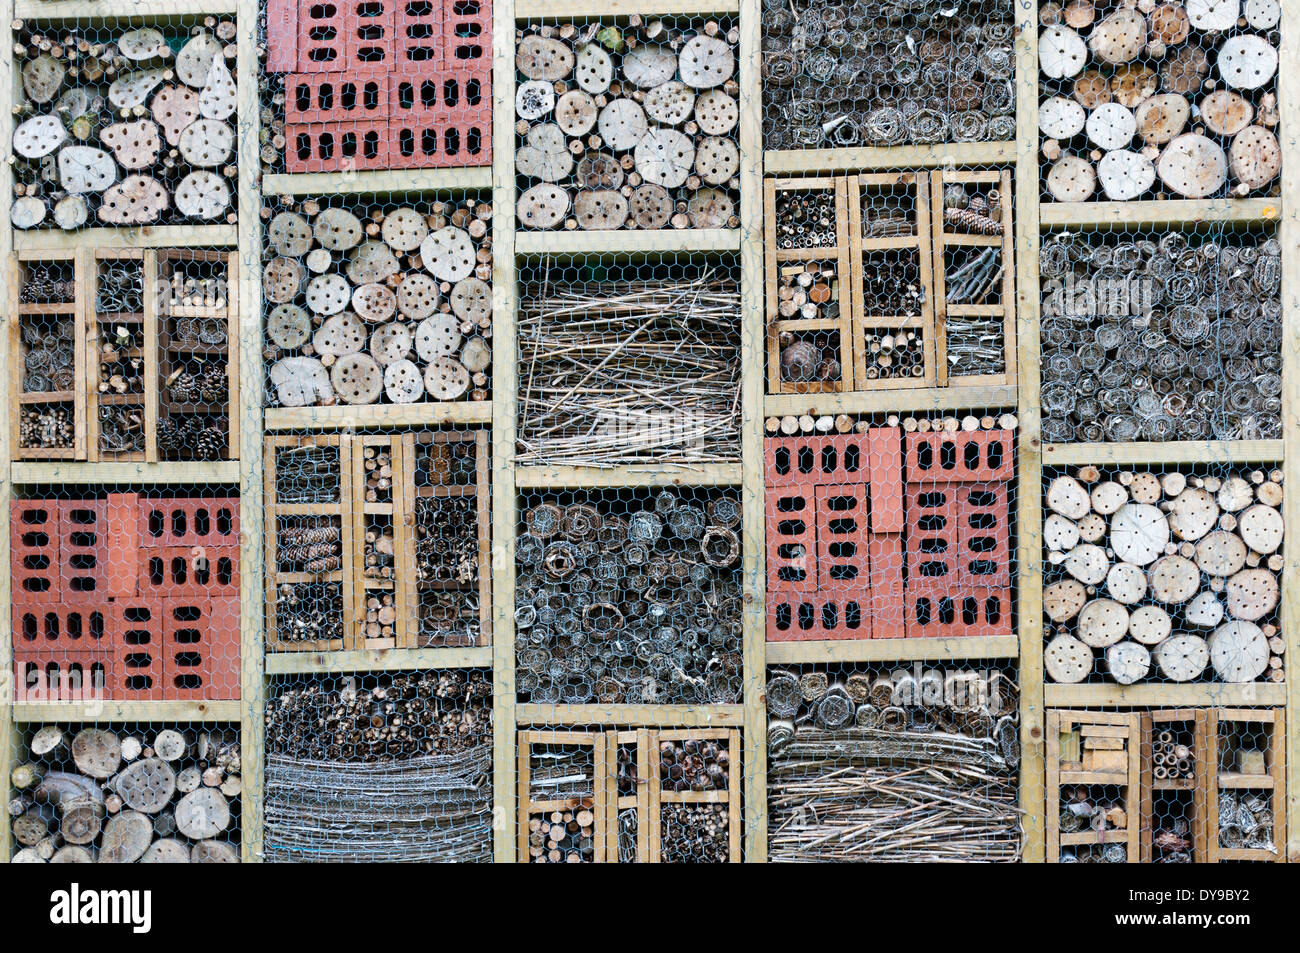 Sections of a bug hotel made from drilled wood, bricks, straw, twigs and pine cones. Stock Photo